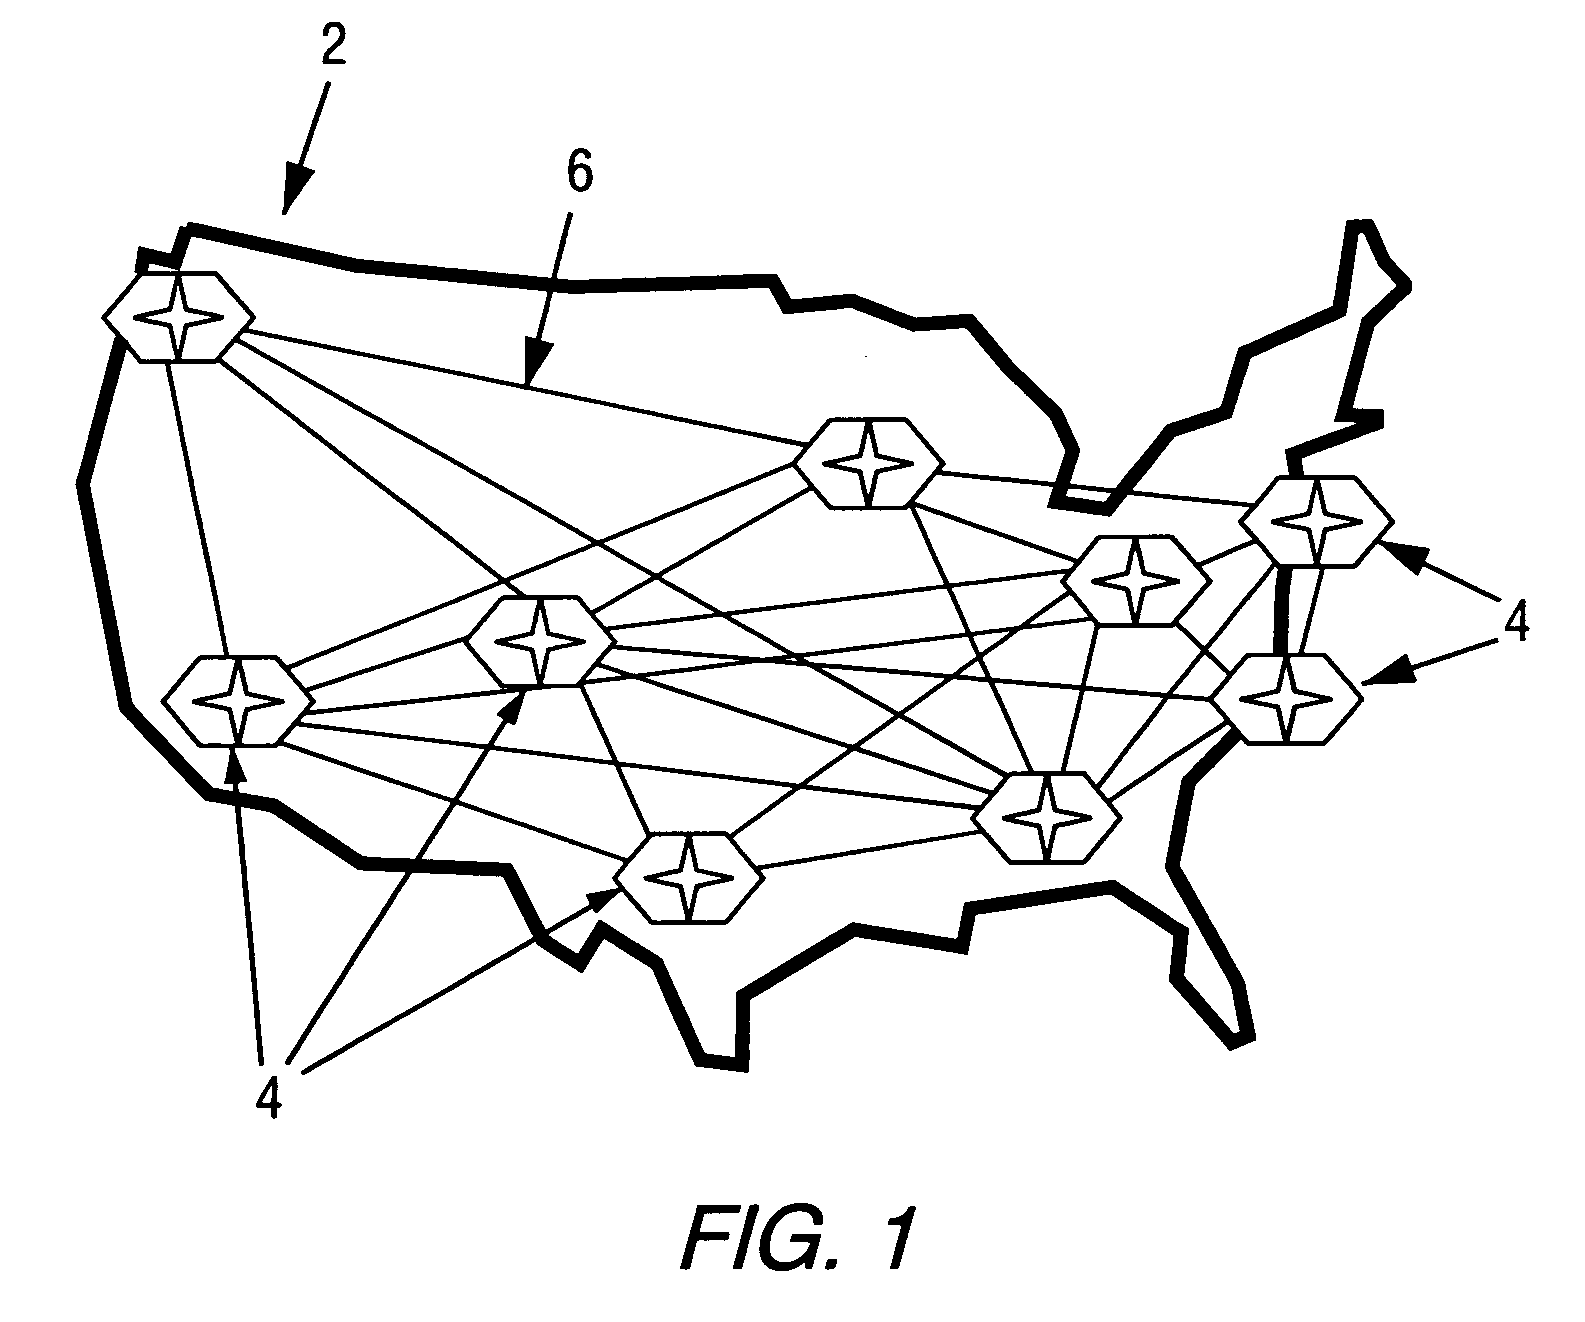 Methods for detecting biological, chemical or nuclear attacks